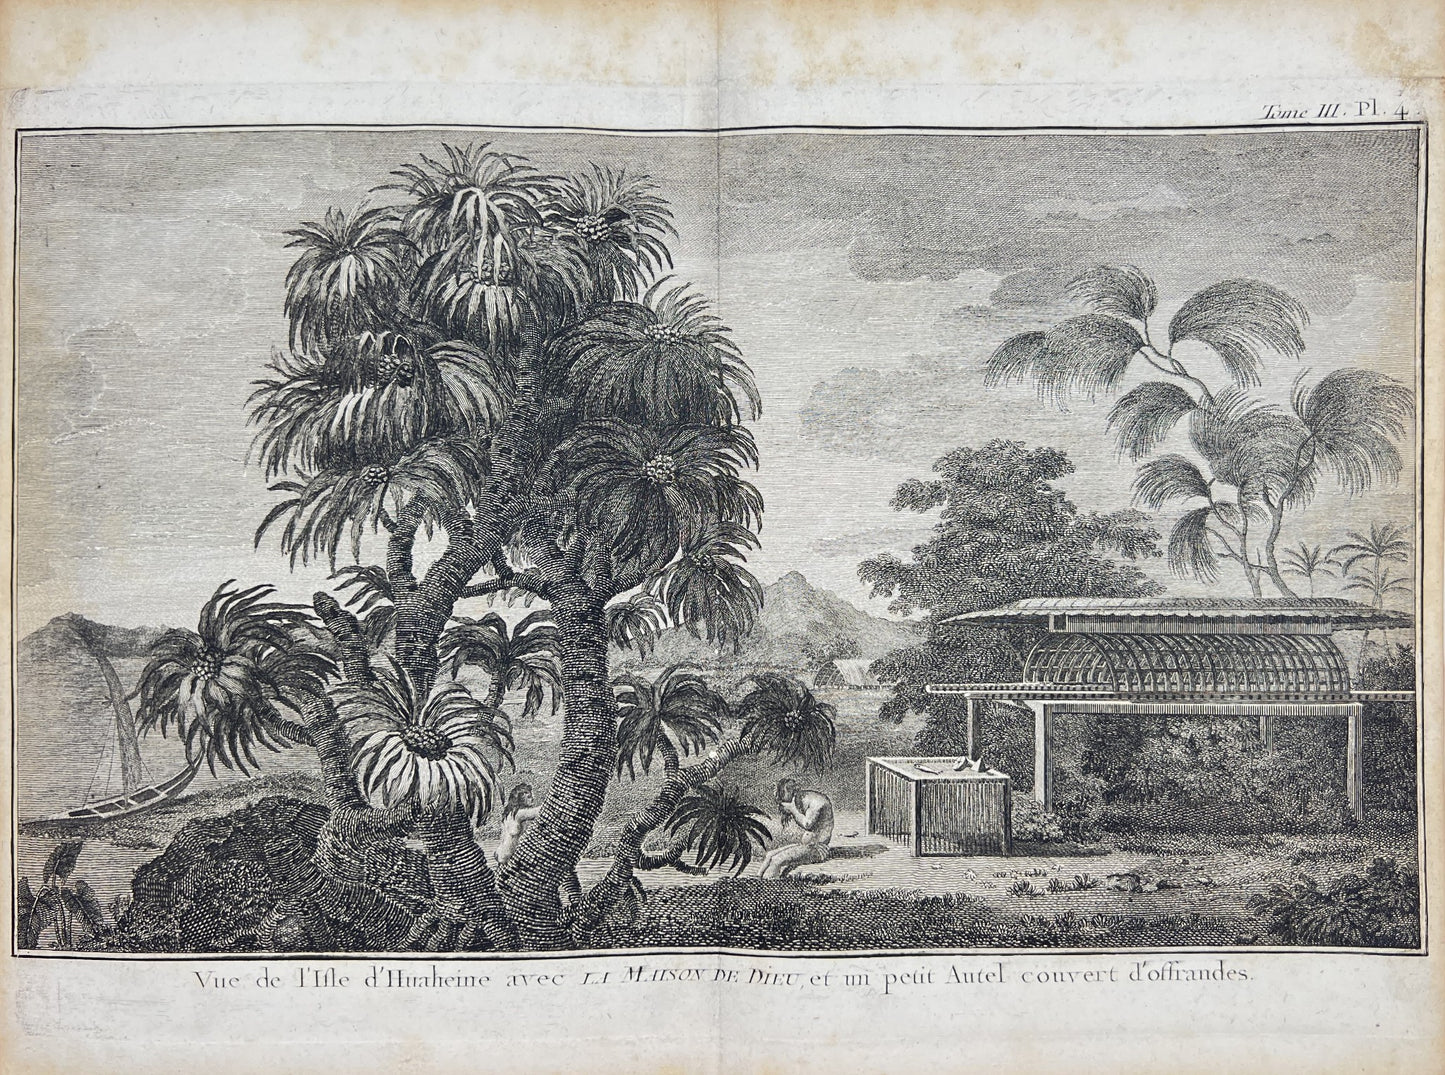 Antique Engraving - Huahine Island - French Polynesian Culture - Captain Cook